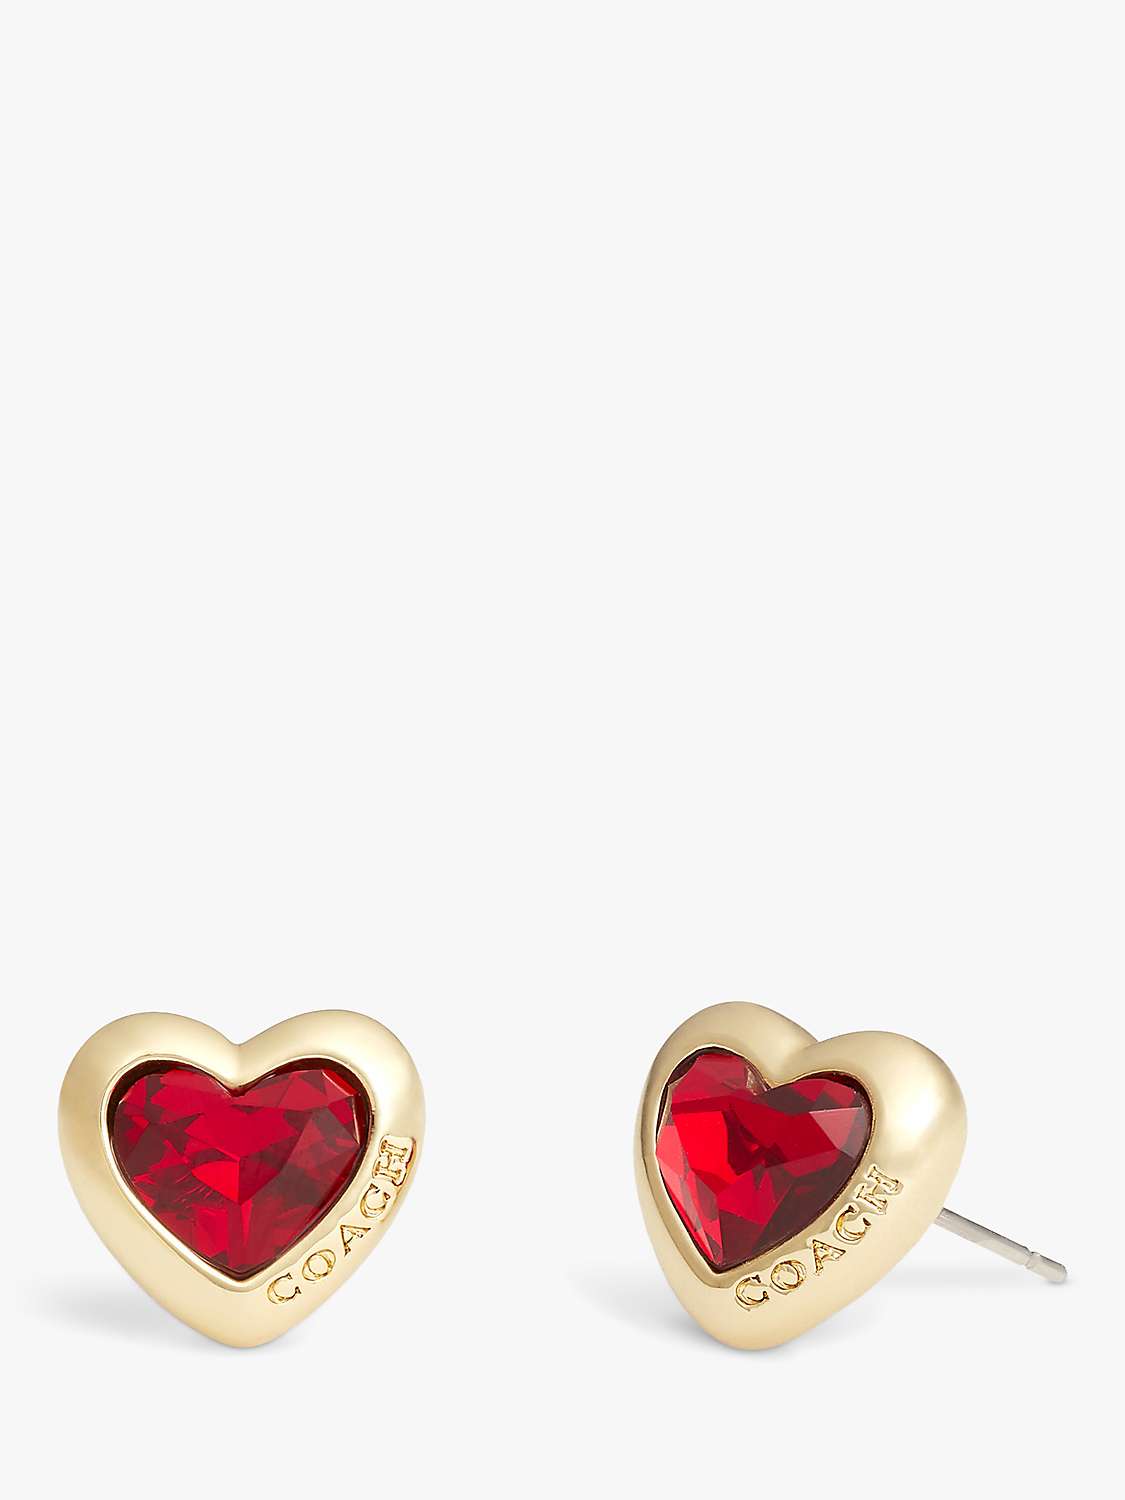 Buy Coach Crystal Heart Stud Earrings, Gold/Red Online at johnlewis.com